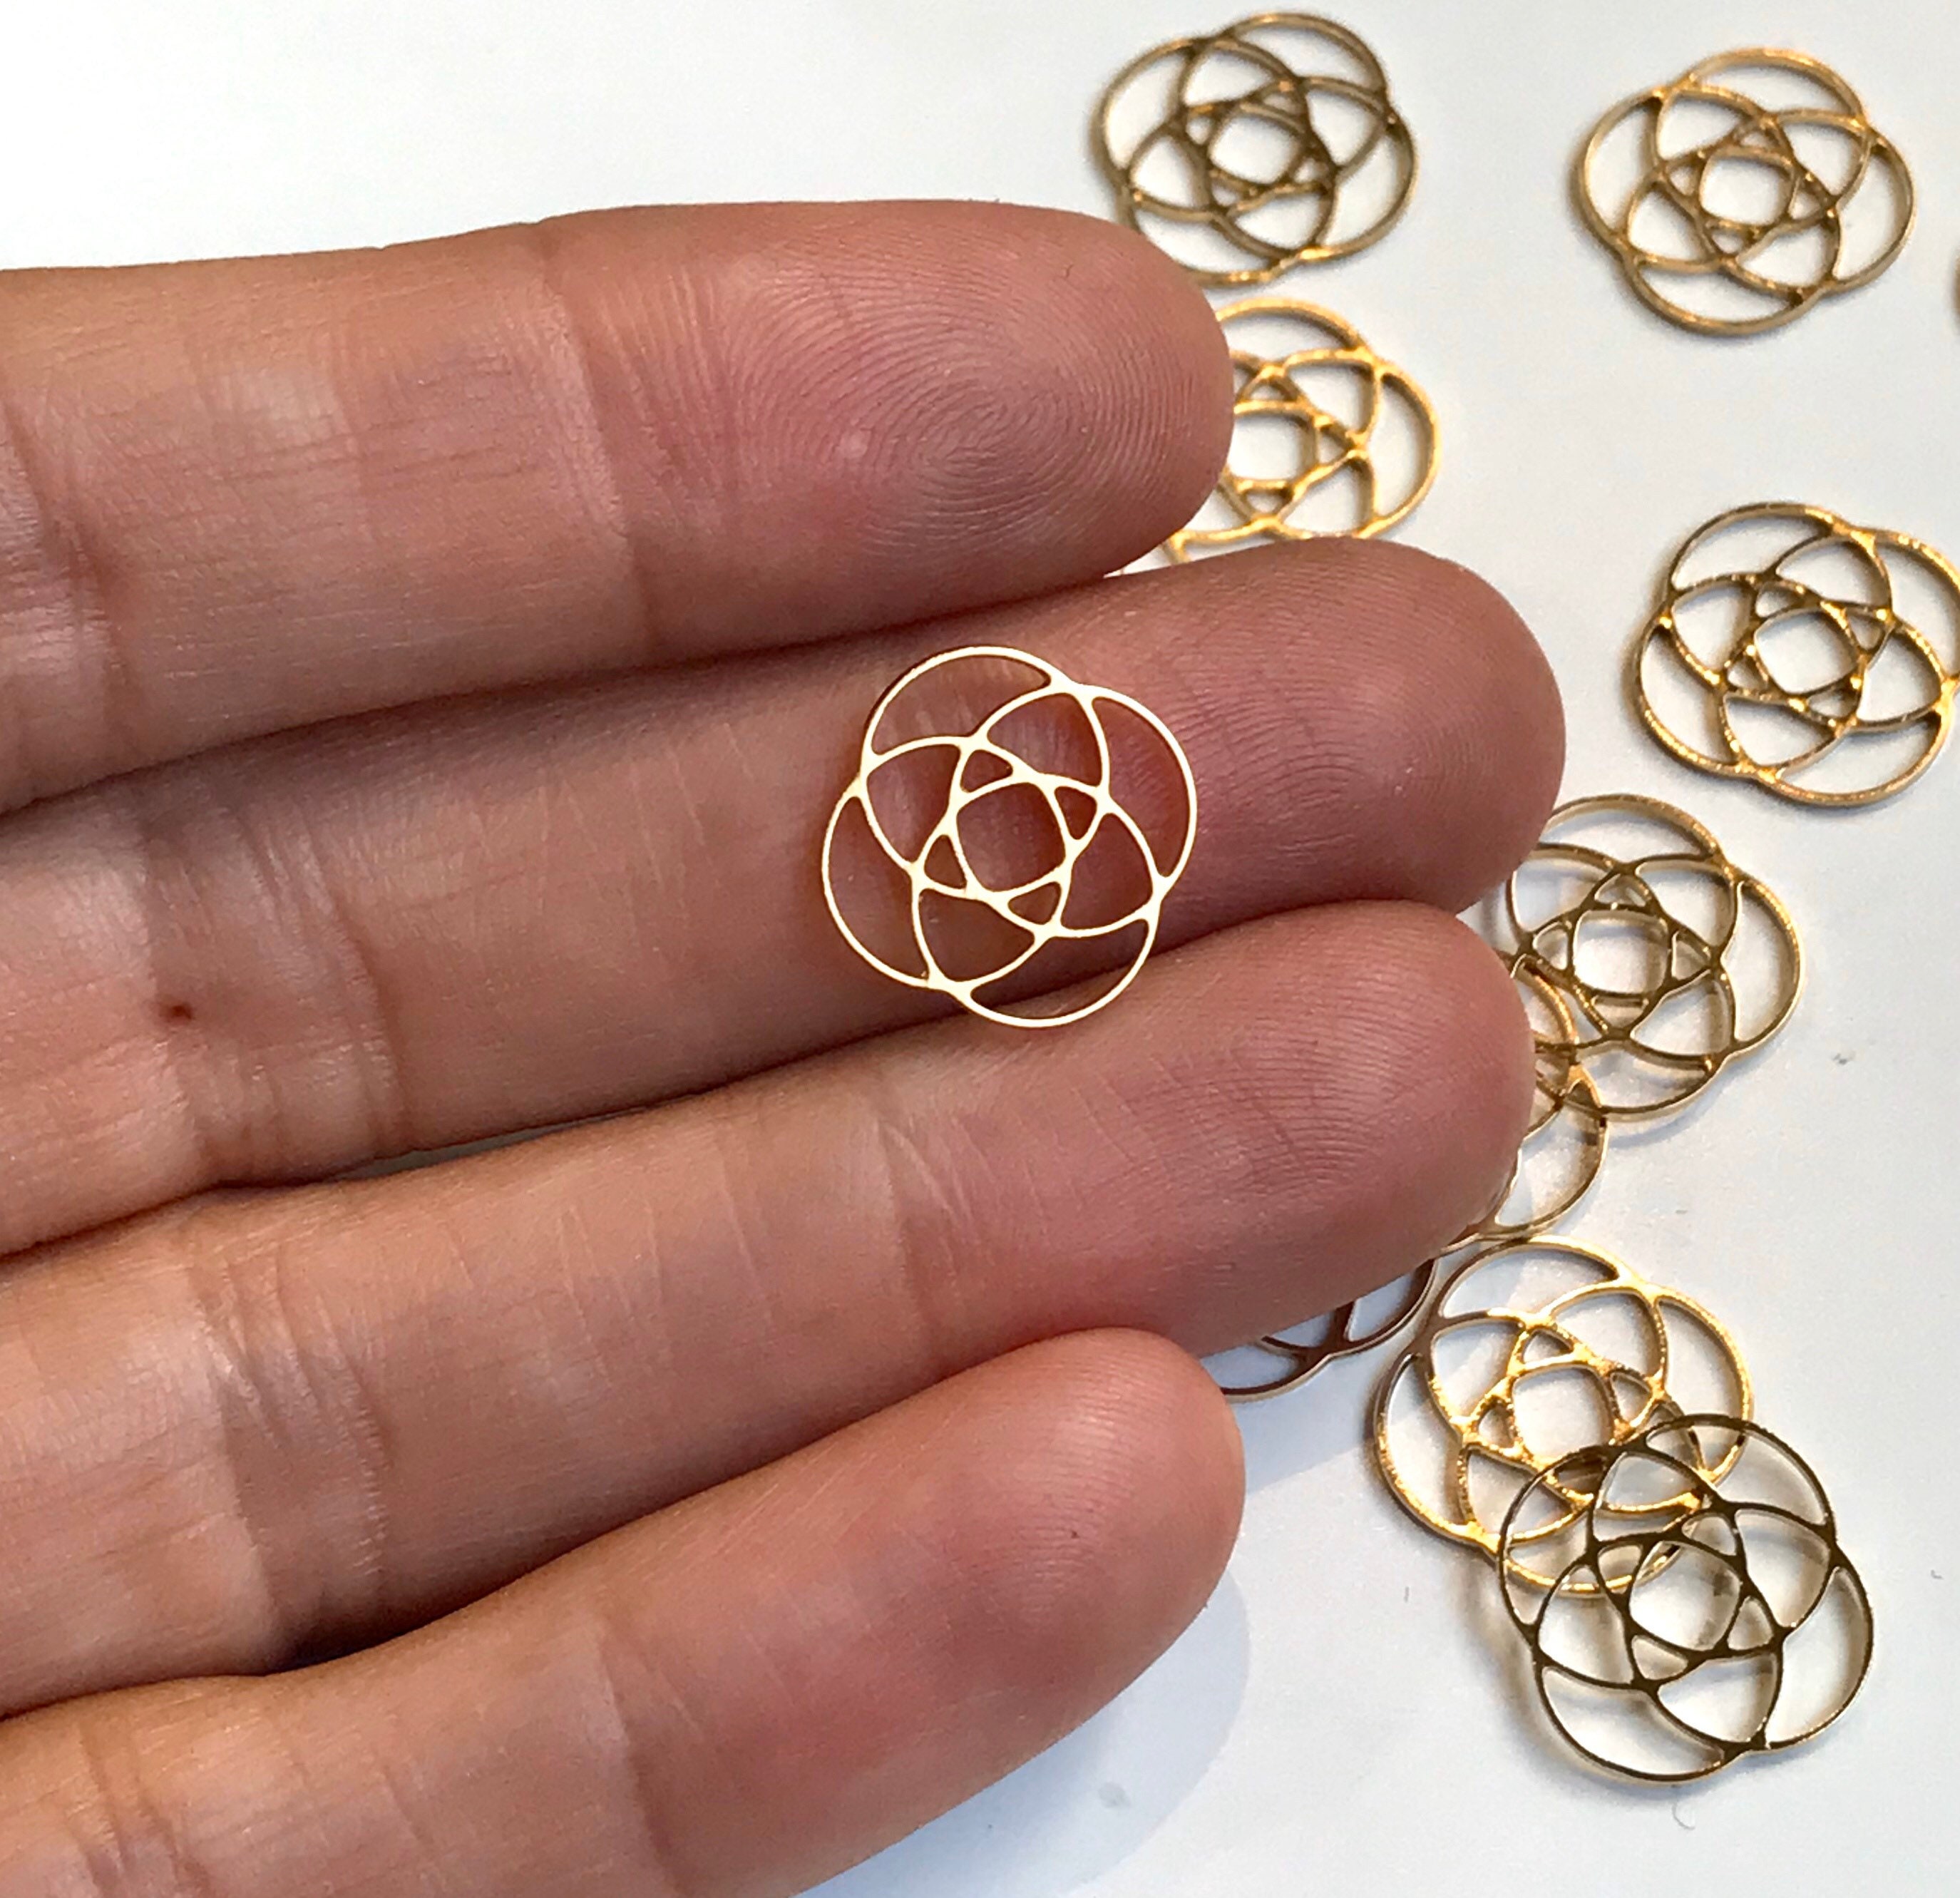 2 Pieces Geometric Charms for Jewelry Making Laser Cut Jewelry